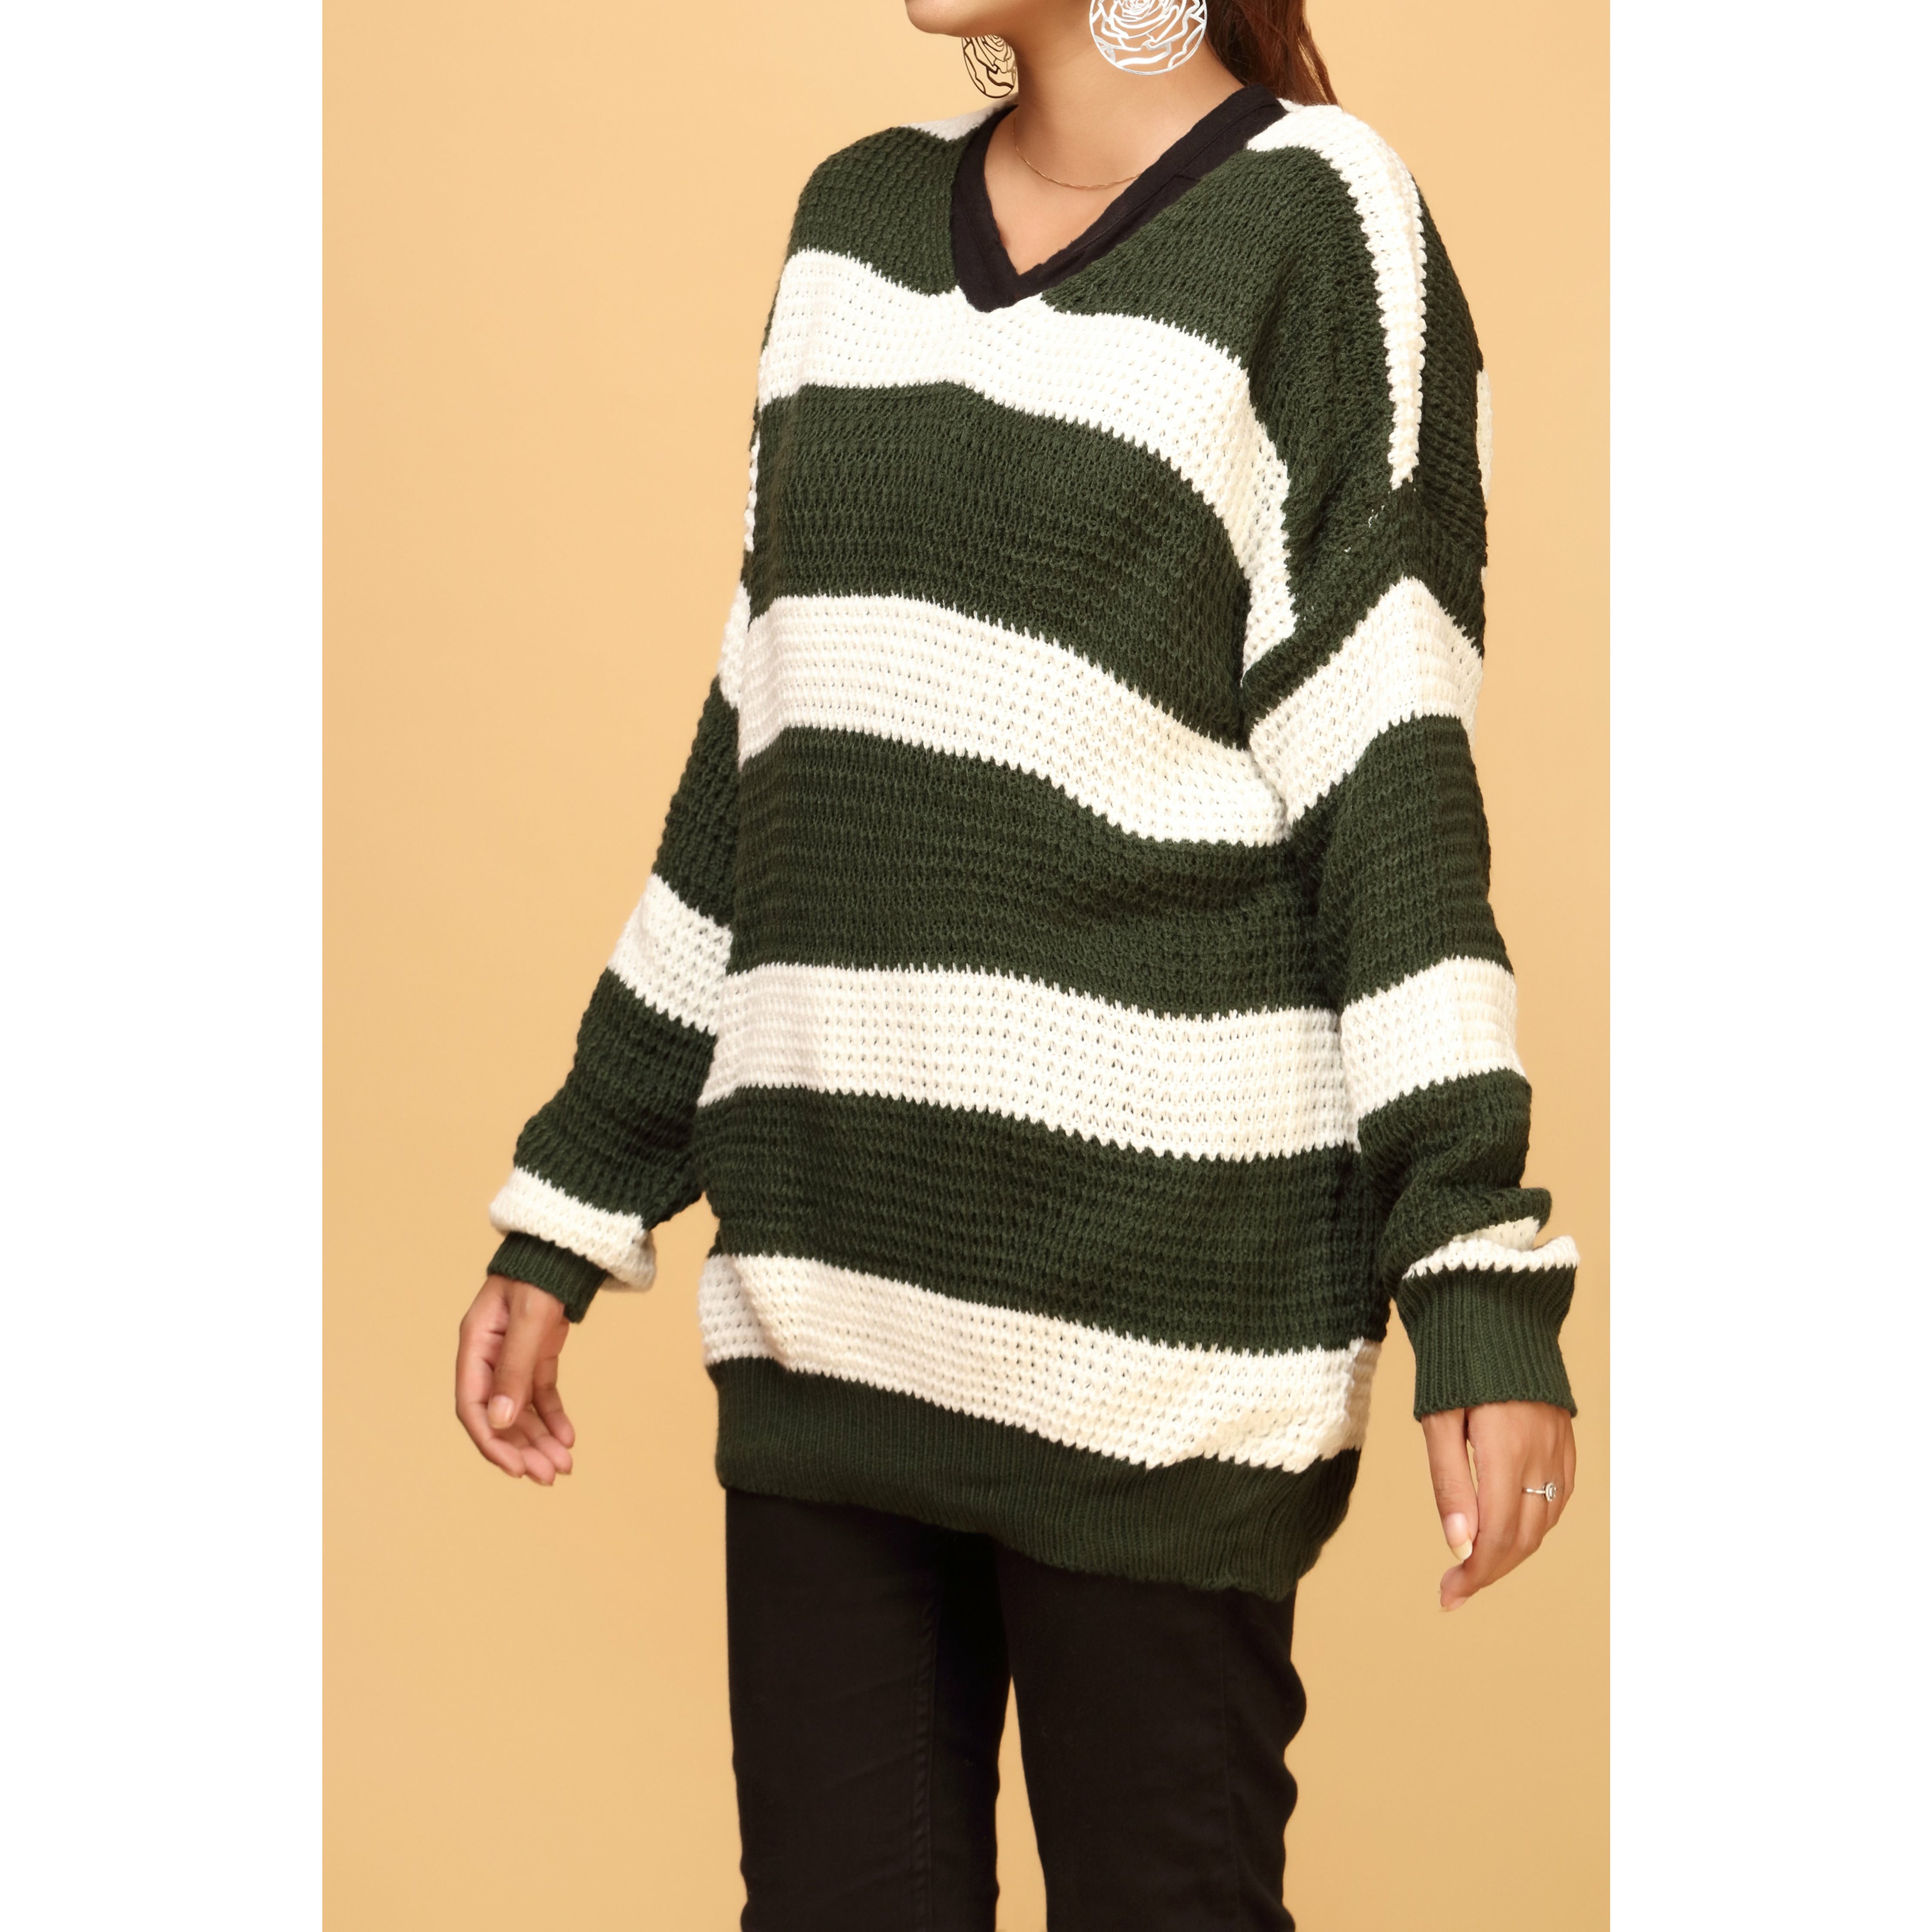 Green Color V-Neck Pullover Sweater PW1910